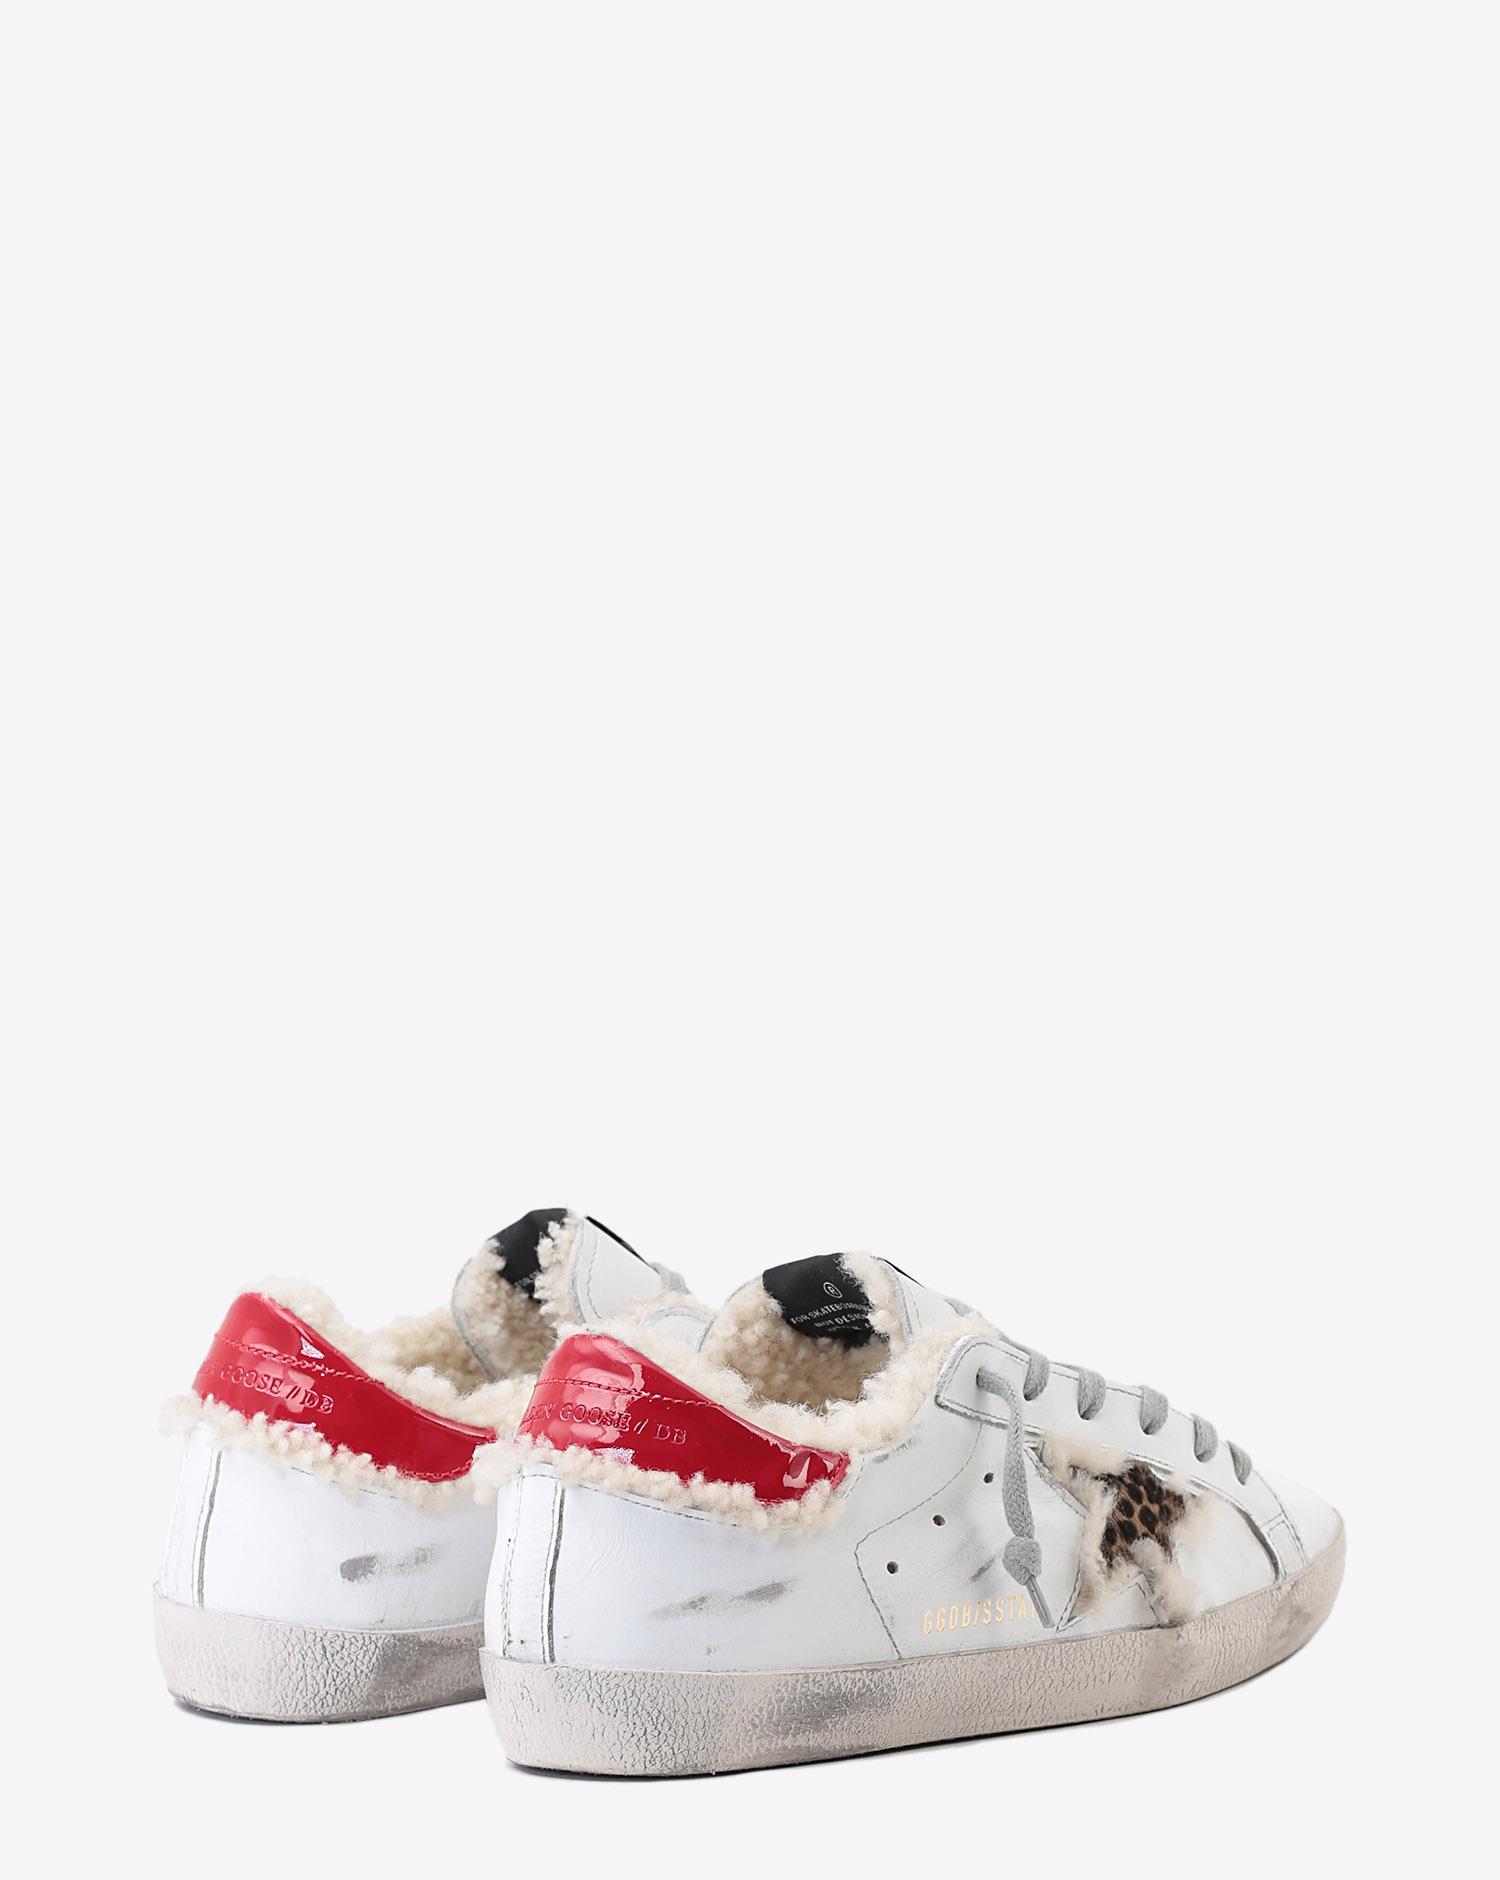 Golden Goose Woman Pré-Collection Sneakers Superstar - White Shearling - Leopard Star  